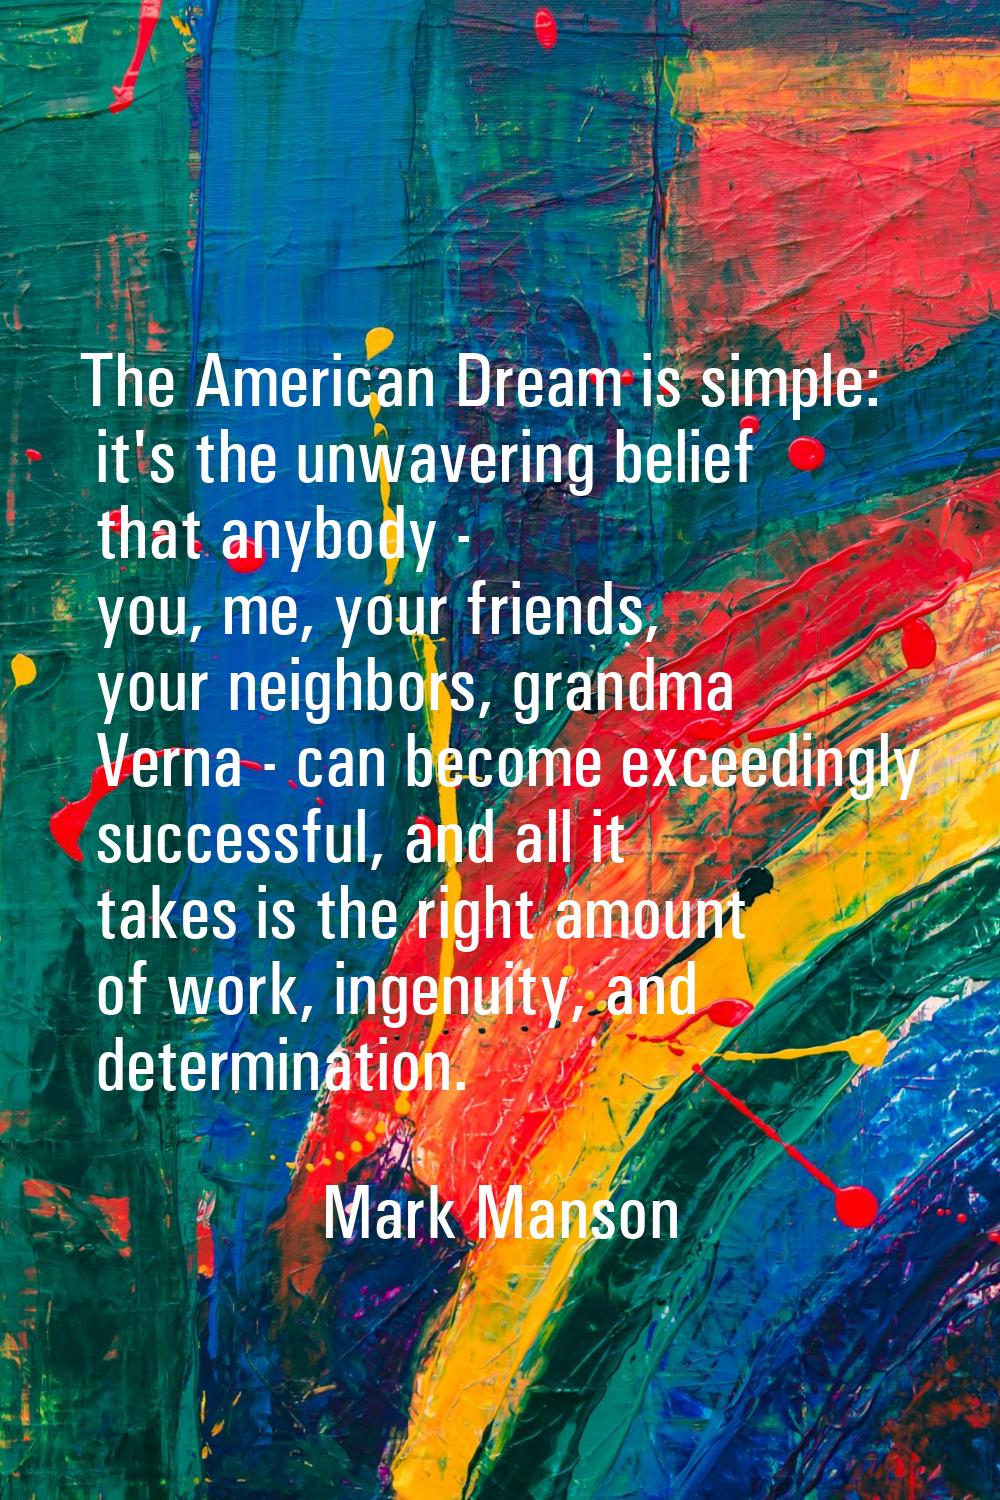 The American Dream is simple: it's the unwavering belief that anybody - you, me, your friends, your